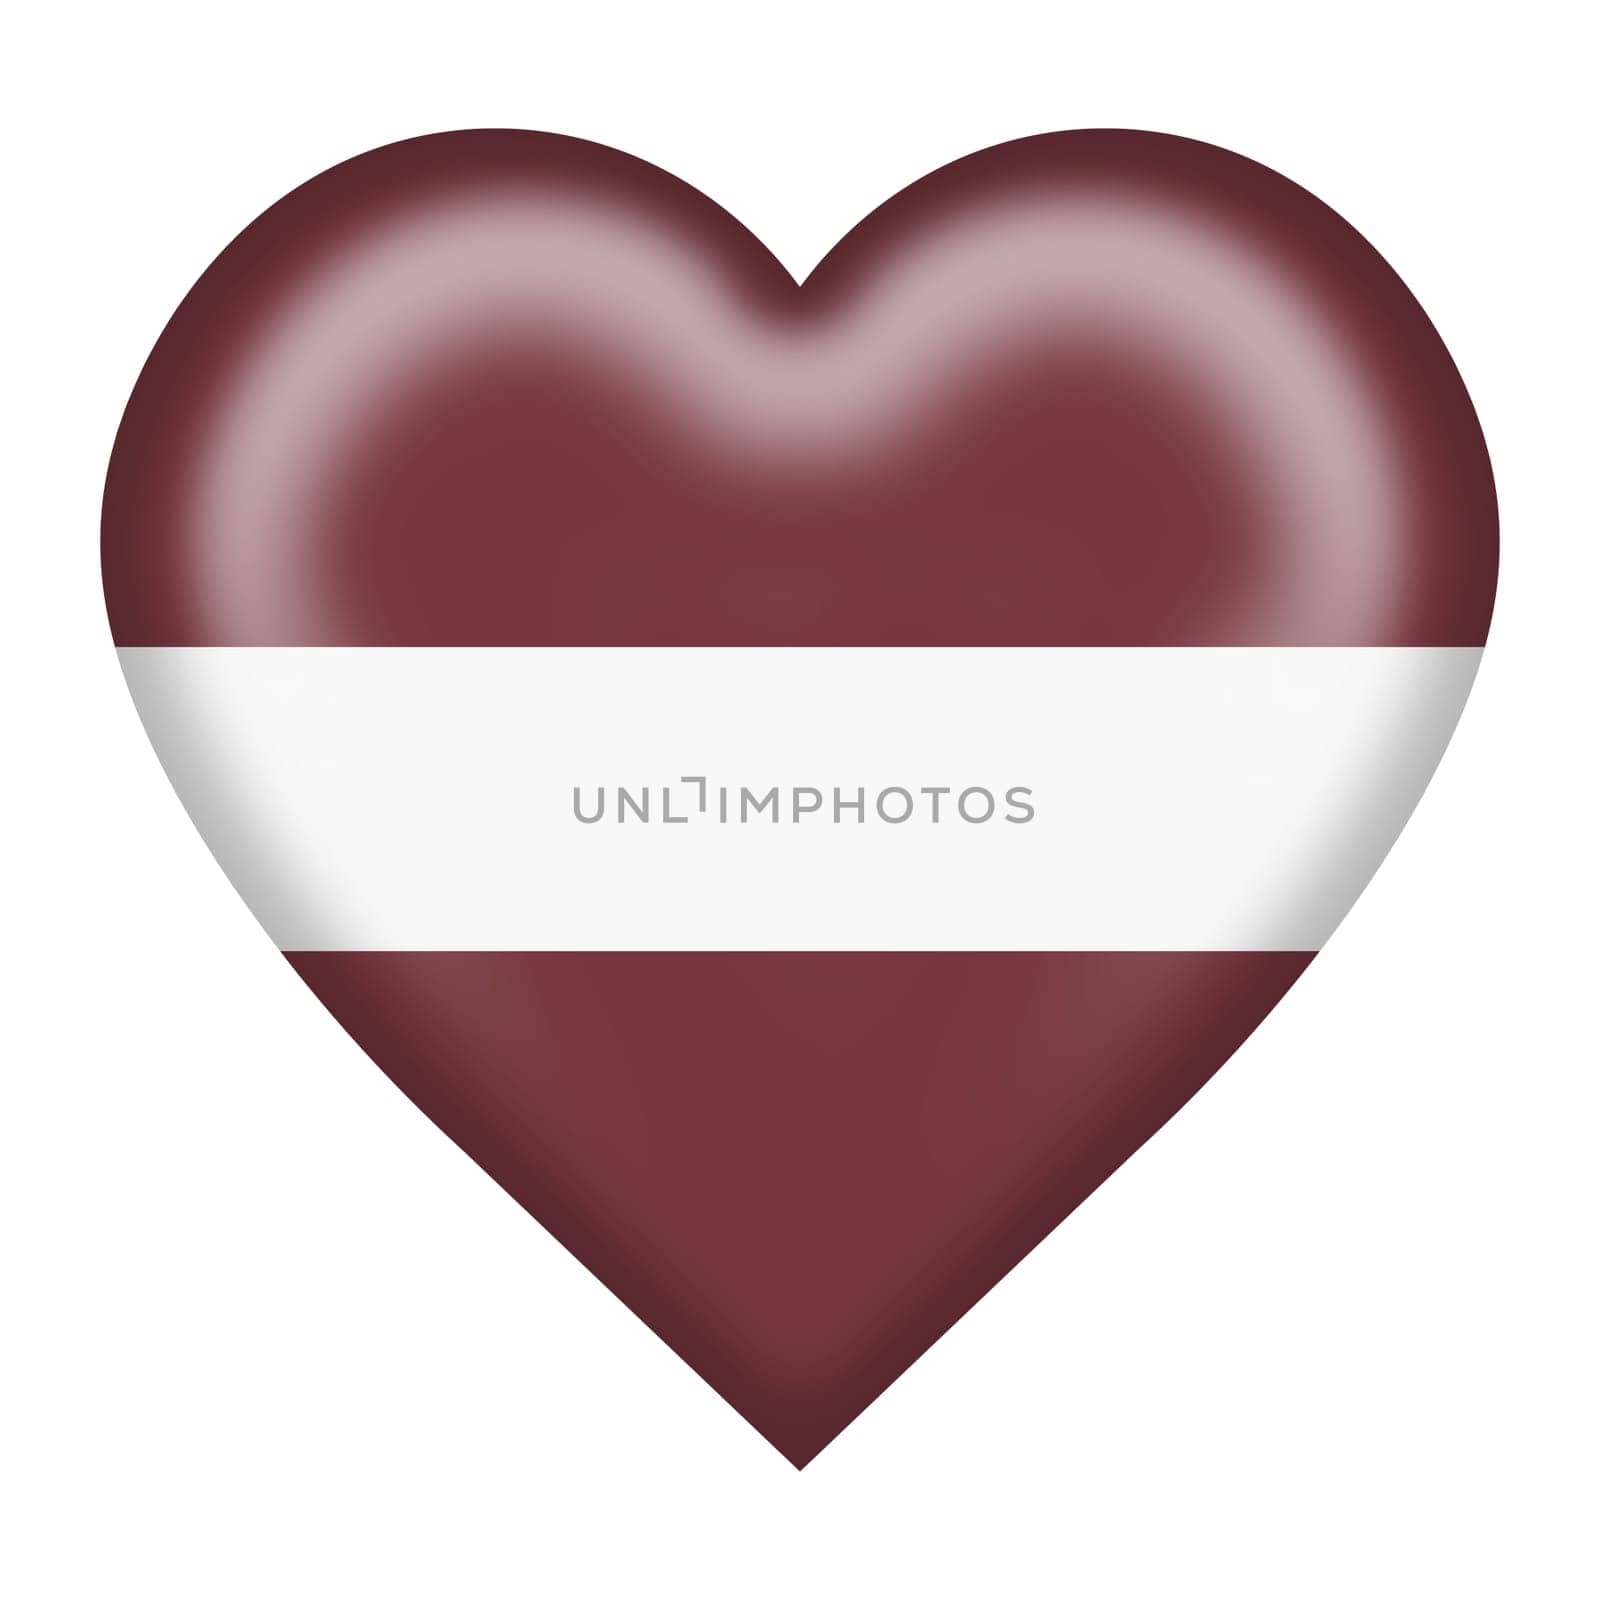 Latvia flag heart button with clipping path by VivacityImages